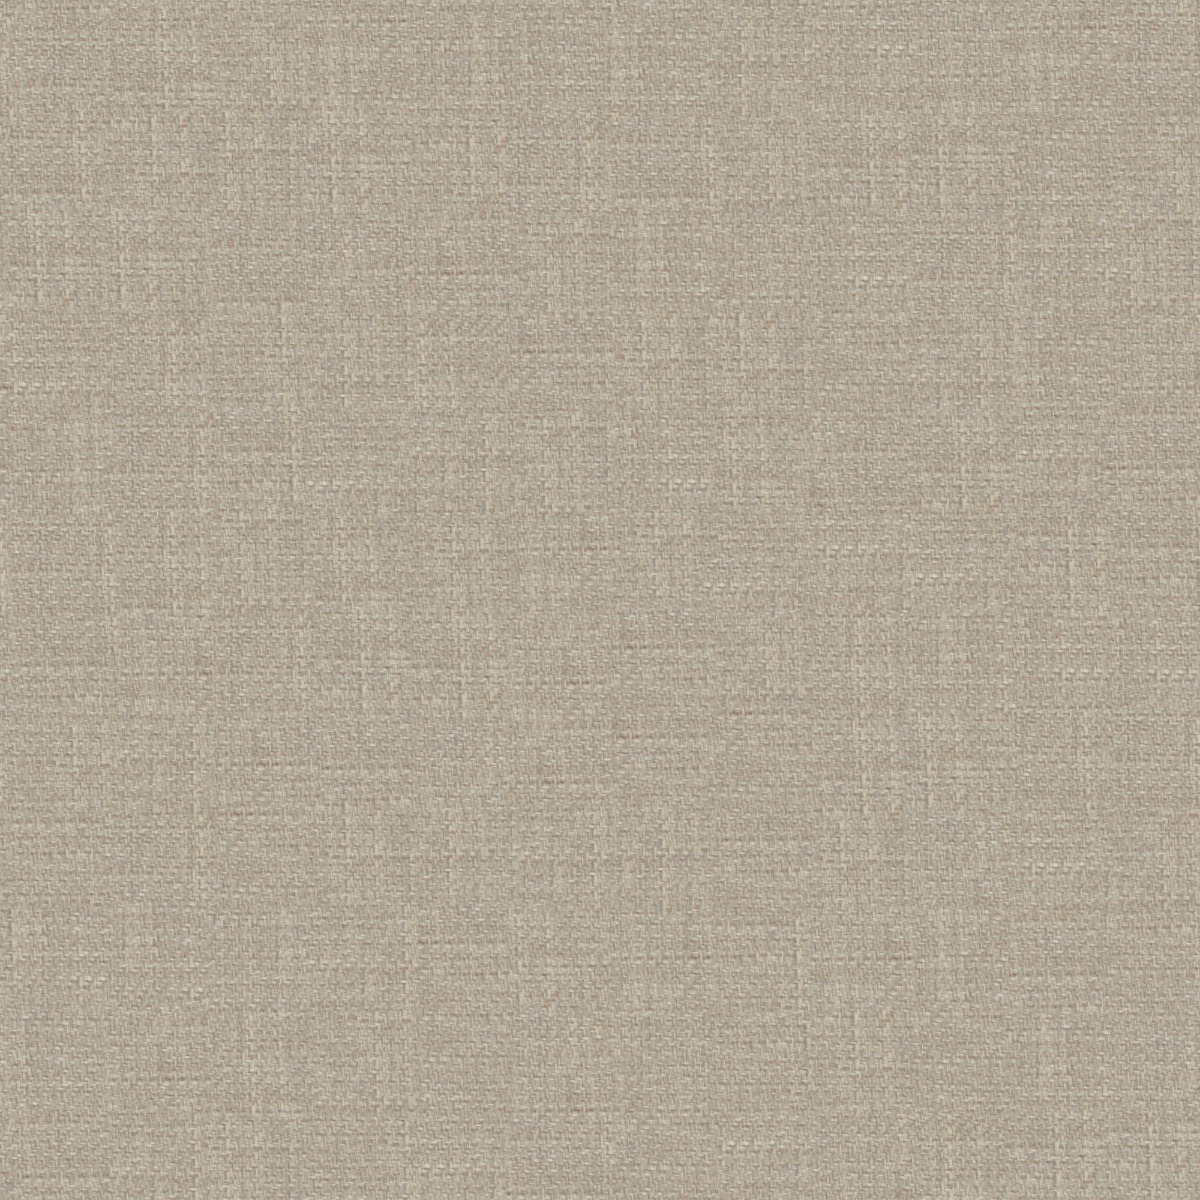 A seamless fabric texture with plain natural texture units arranged in a None pattern